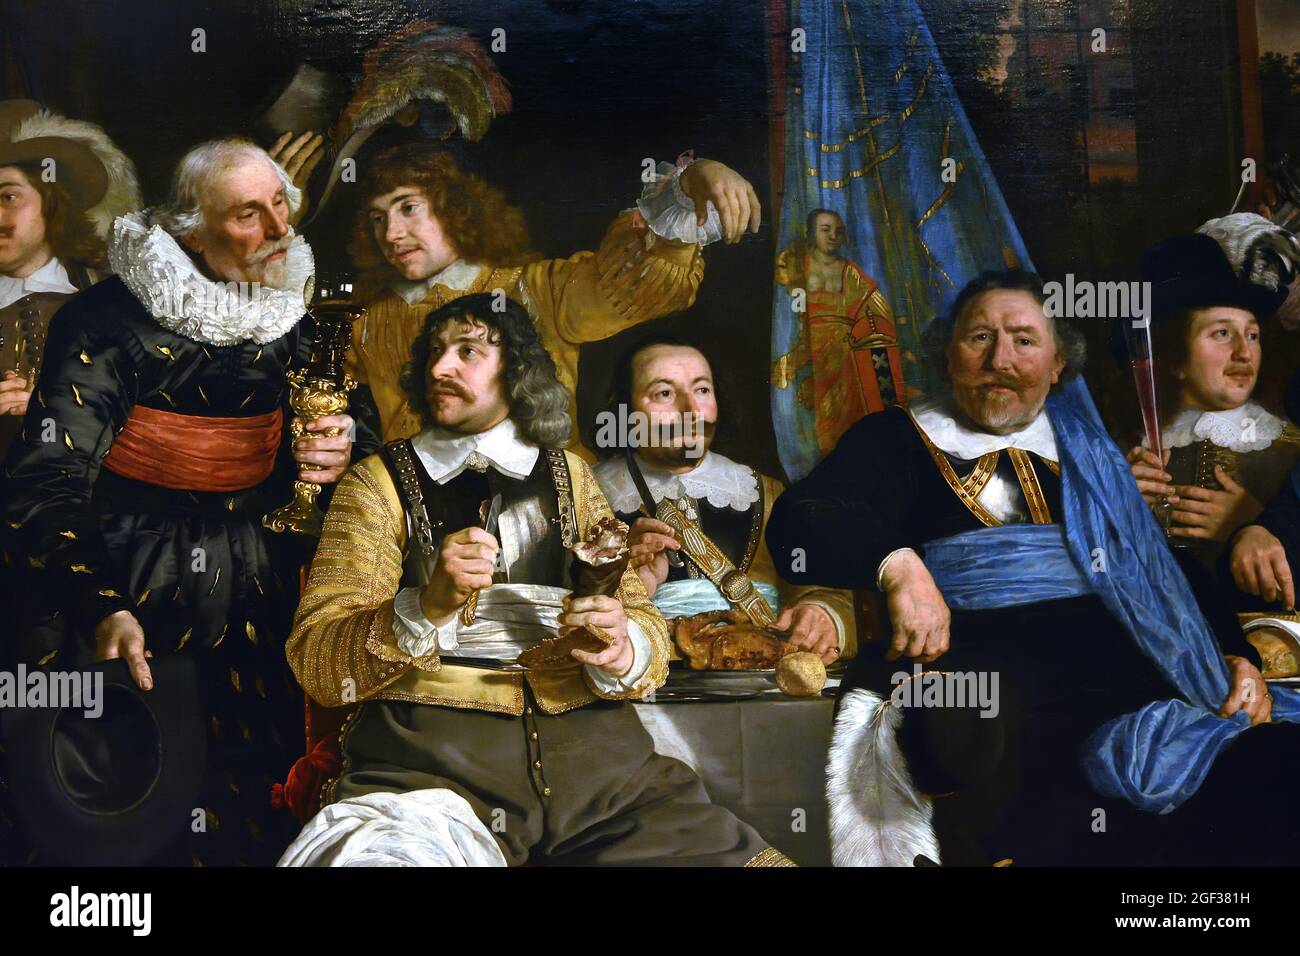 Schuttersmaaltijd ter viering van de Vrede van Munster - Archers Meal in Celebration of the Peace of Munster 1648 by Bartholomeus van der Helst, 1613-1670 oil on canvas,  (June 18, 1648 Feast at the Amsterdam archers. Peace of Munster, end of the war with Spain. The leaders of the militia shake hands as a sign of peace, the drinking horn is doing the rounds. . Dutch, The Netherlands.) Eighty Years, War, Spanish, Dutch, Netherlands,  Eighty Years' War, (1568–1648), war of  Netherlands  independence from Spain, Stock Photo